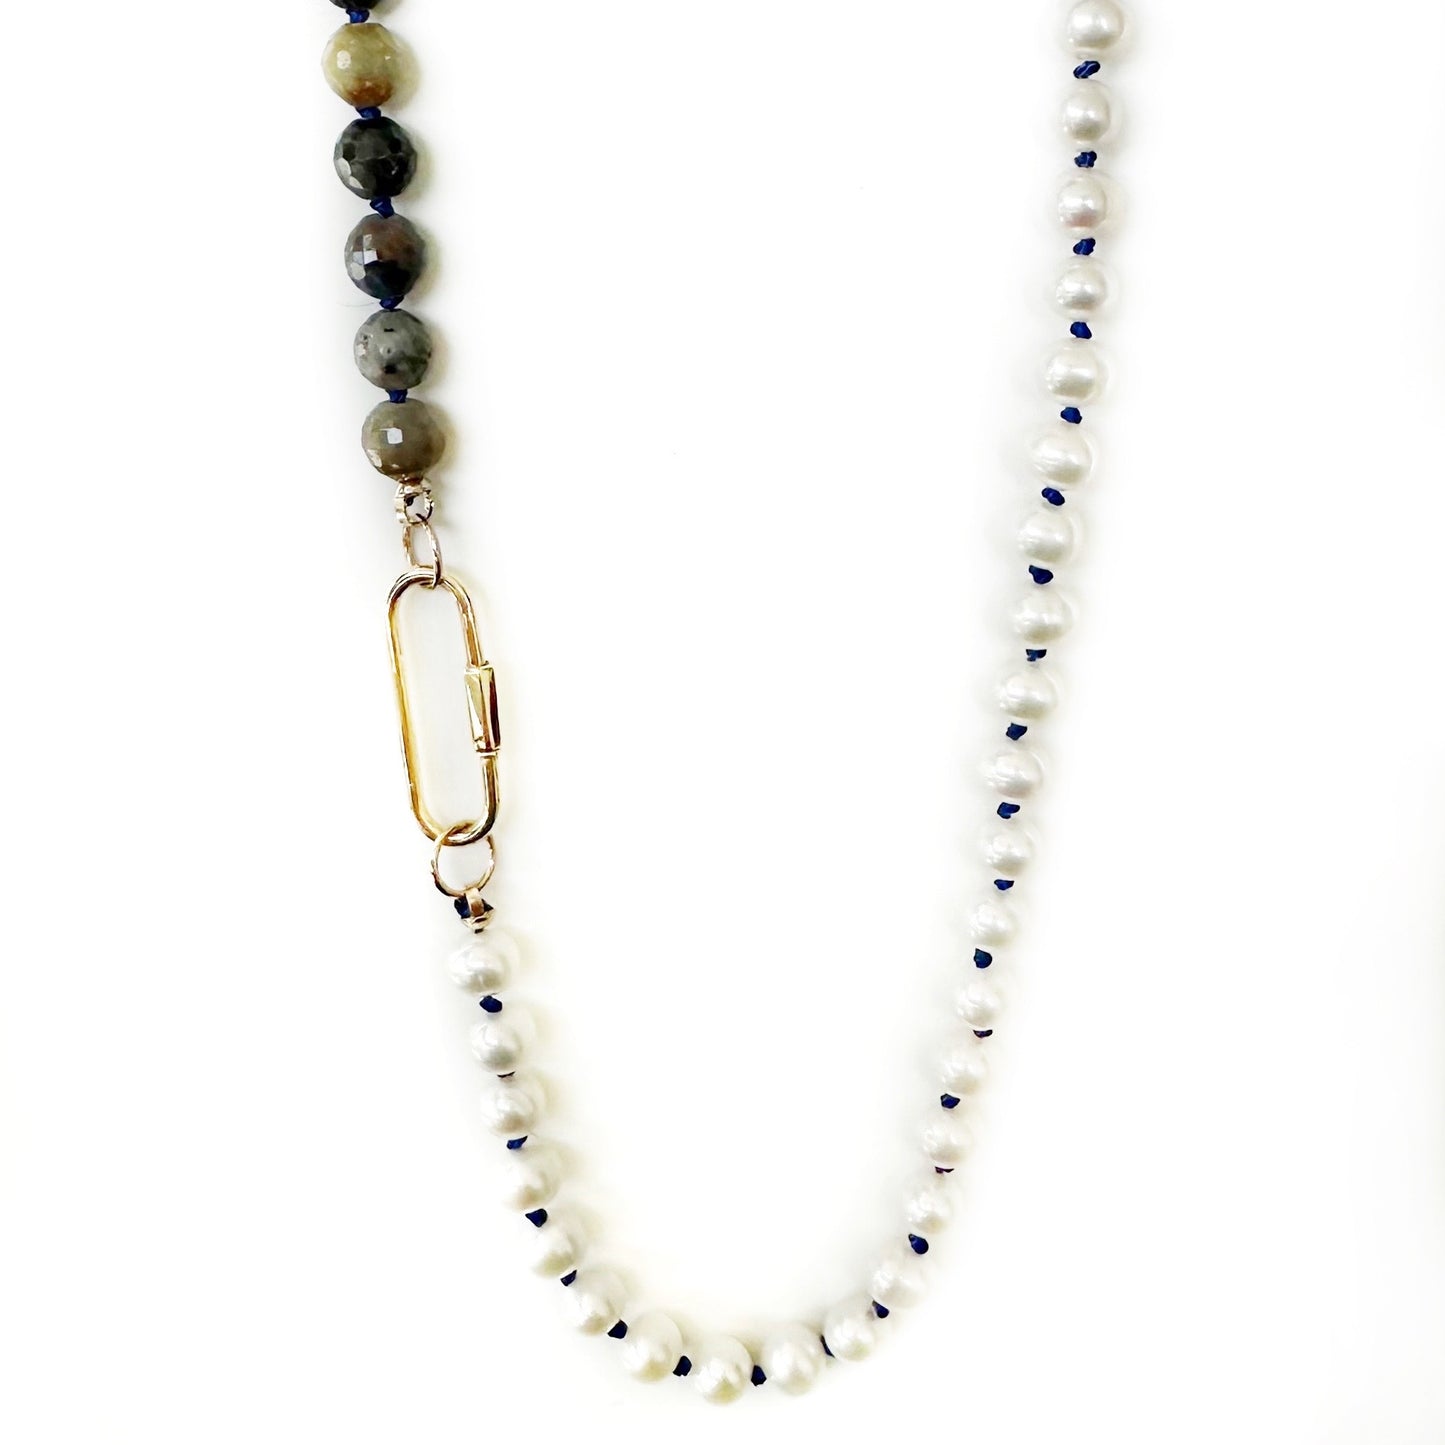 Sapphire and Pearl Gemstone Necklace